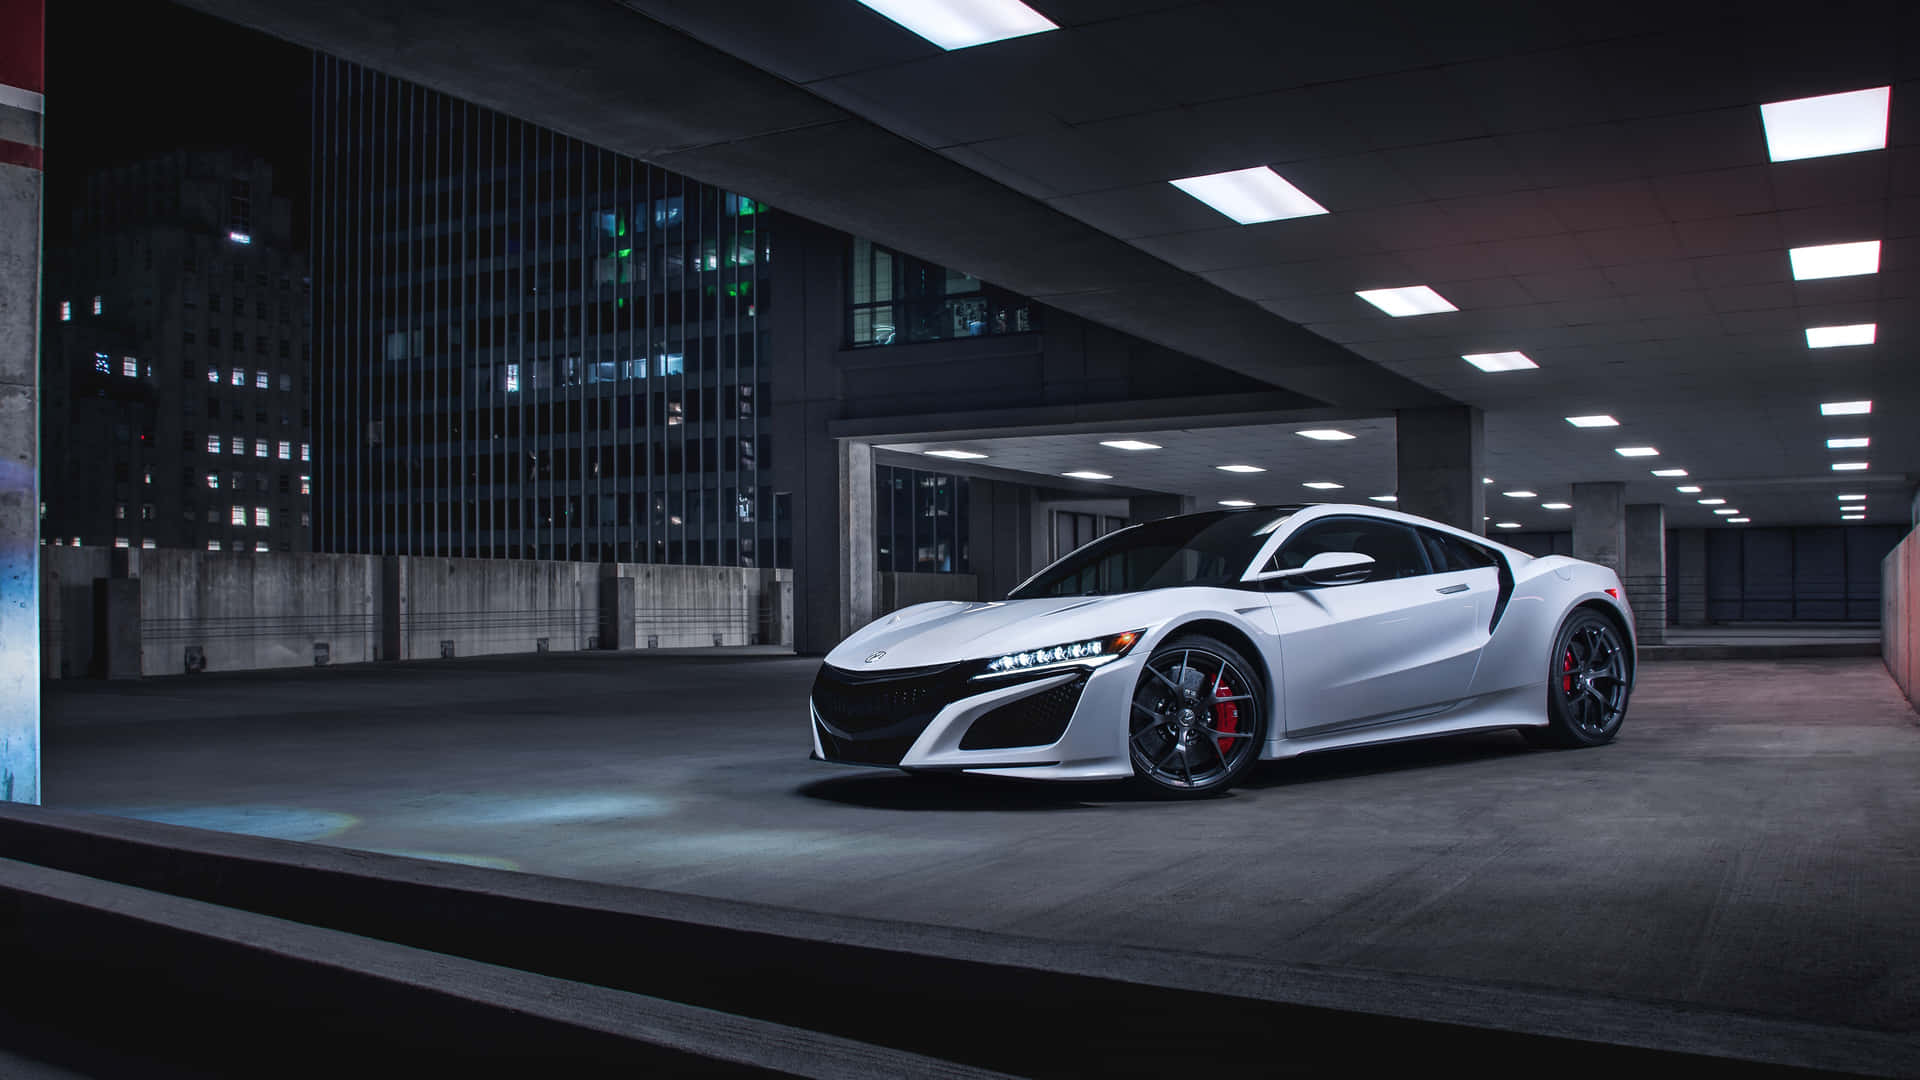 Captivating Acura NSX in a Stunning Landscape Wallpaper